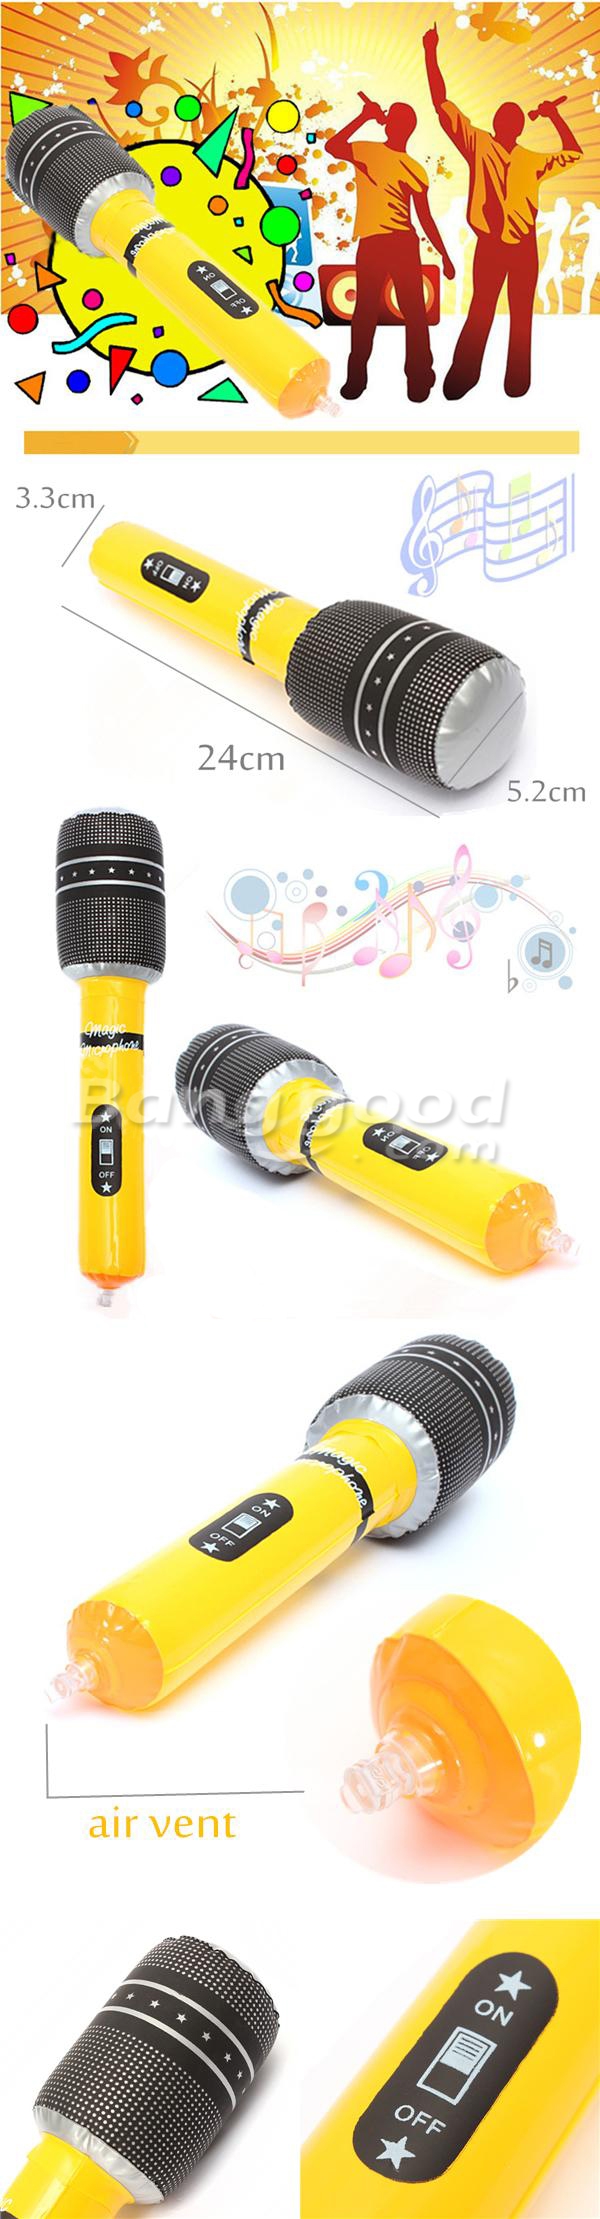 Blow up Inflatable Plastic Microphone 24CM Party Favor Kids Toy Gift